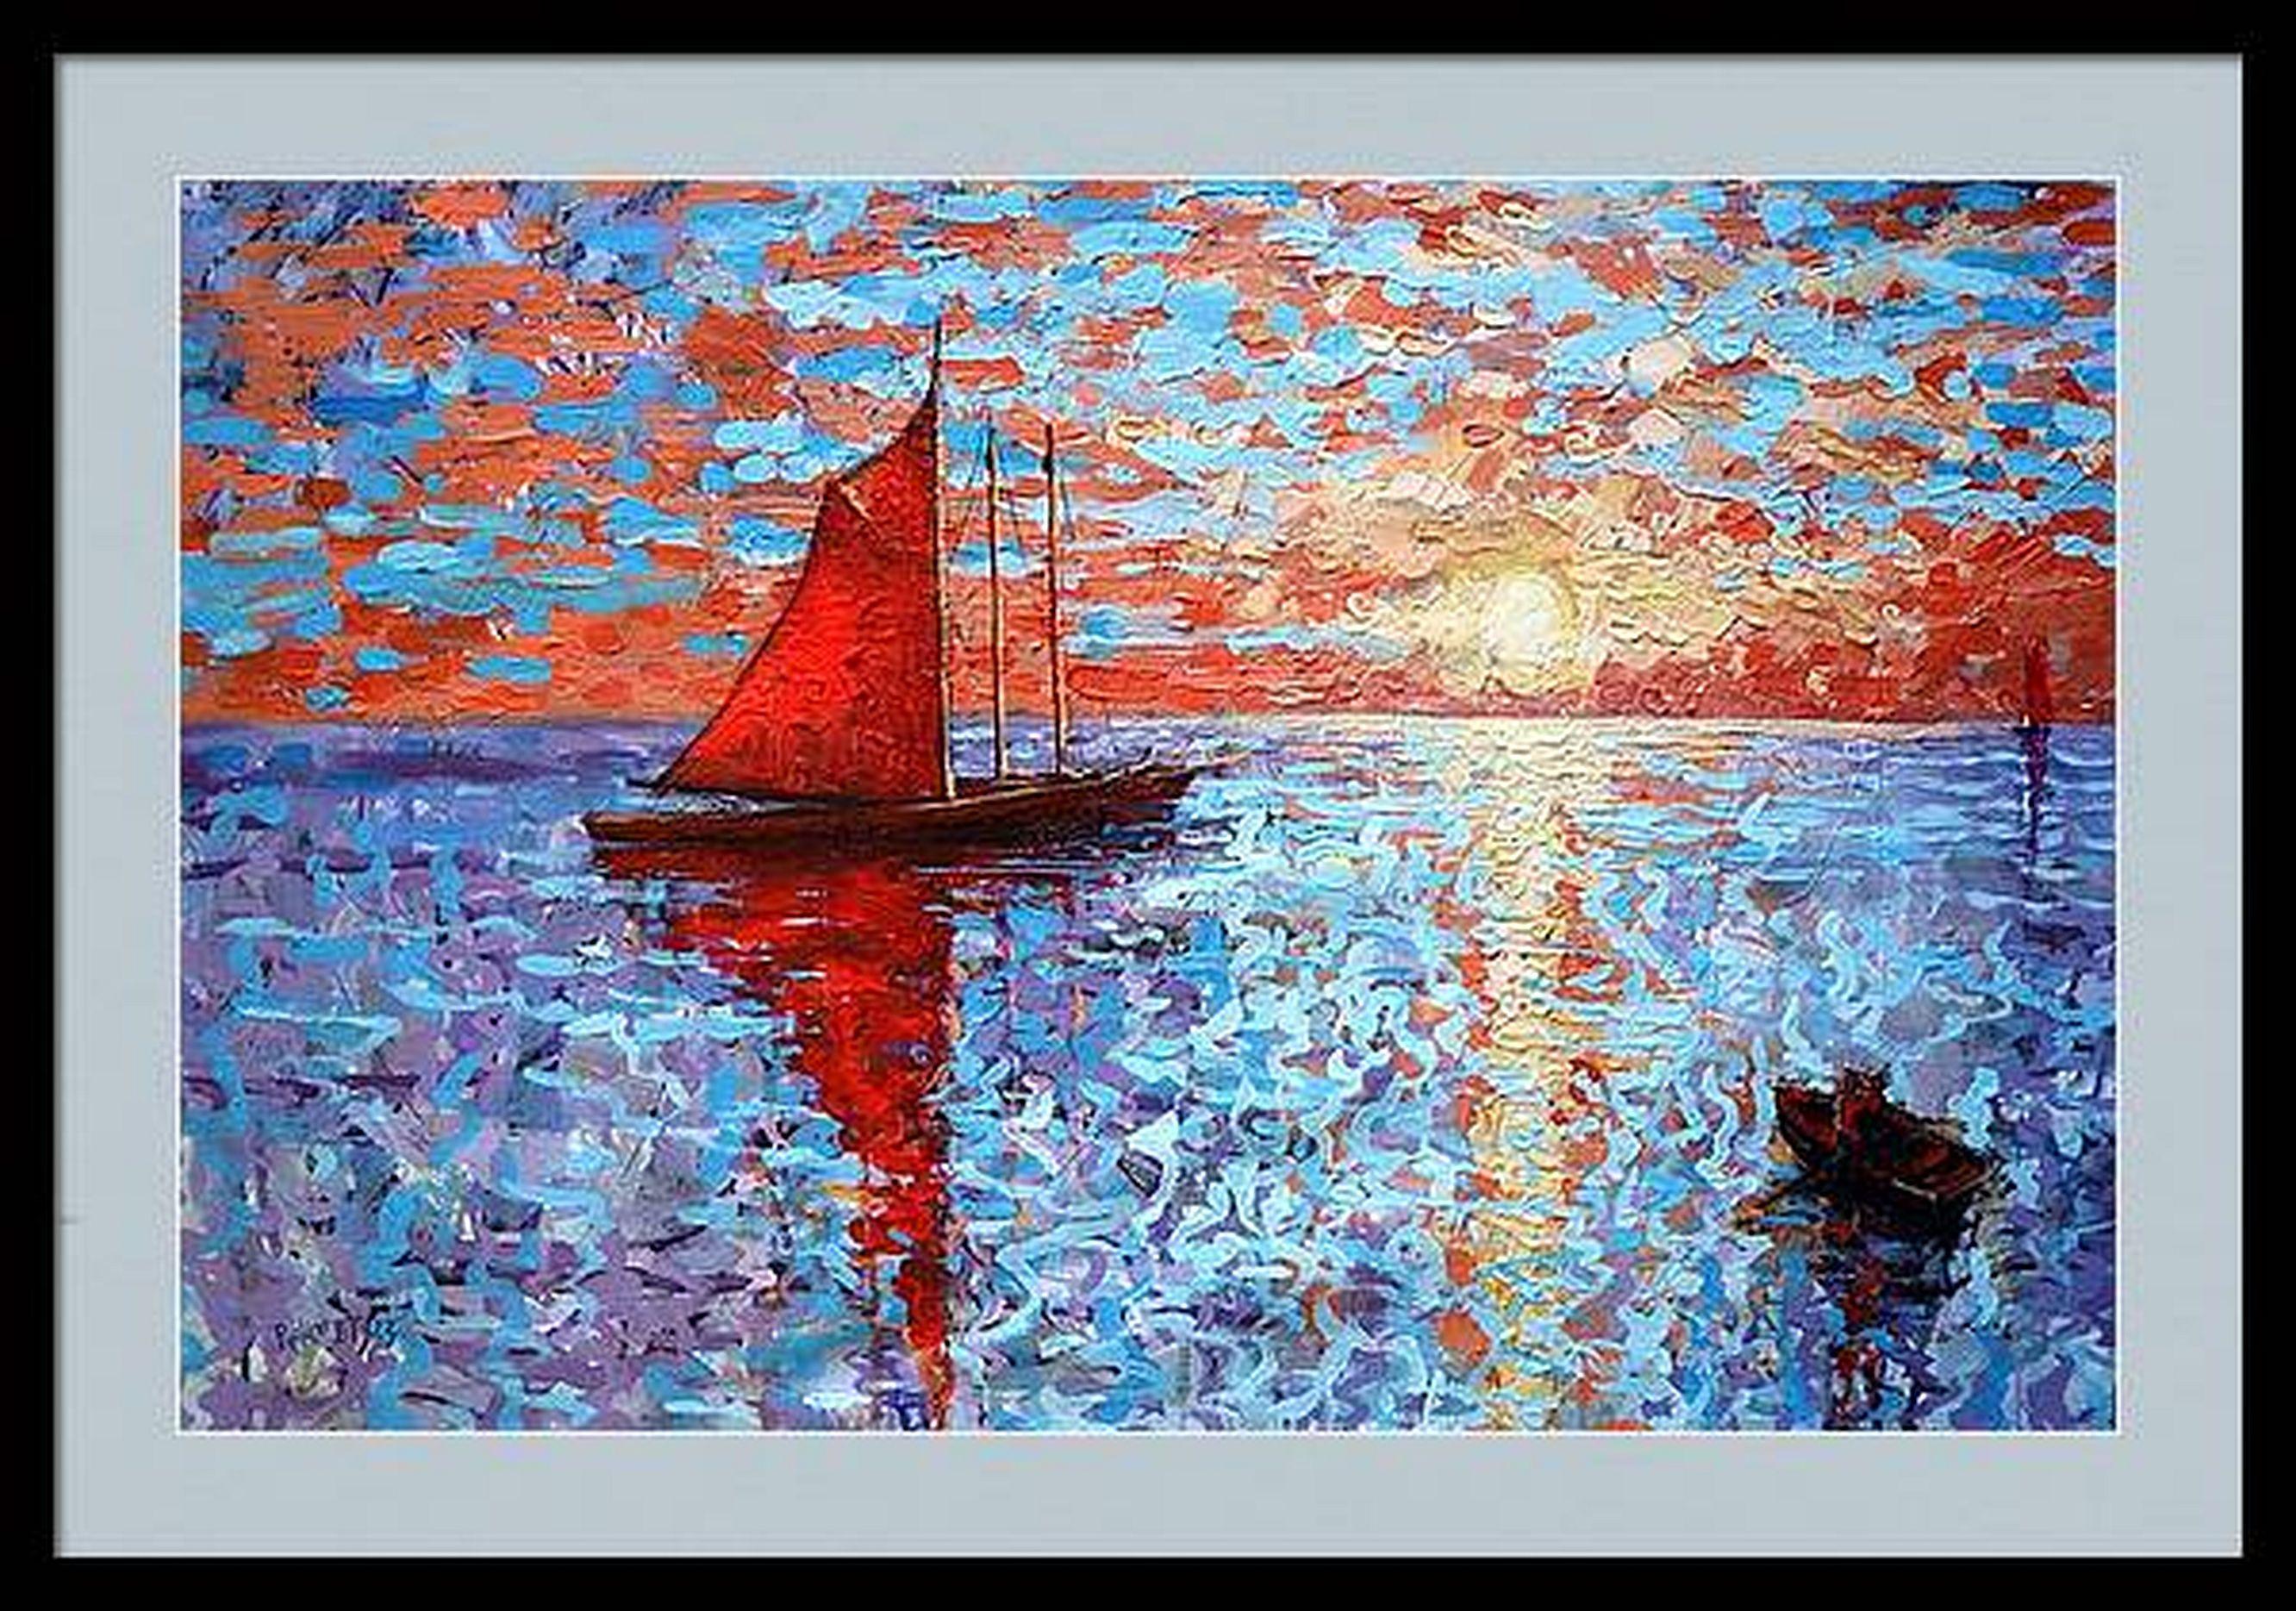 In crafting this piece, I wielded acrylic and oil to capture an evocative dance of color and light. The blend of impressionist and expressionist styles breathes life into the serene expanse of water, while the vivid sail cuts through the tranquil